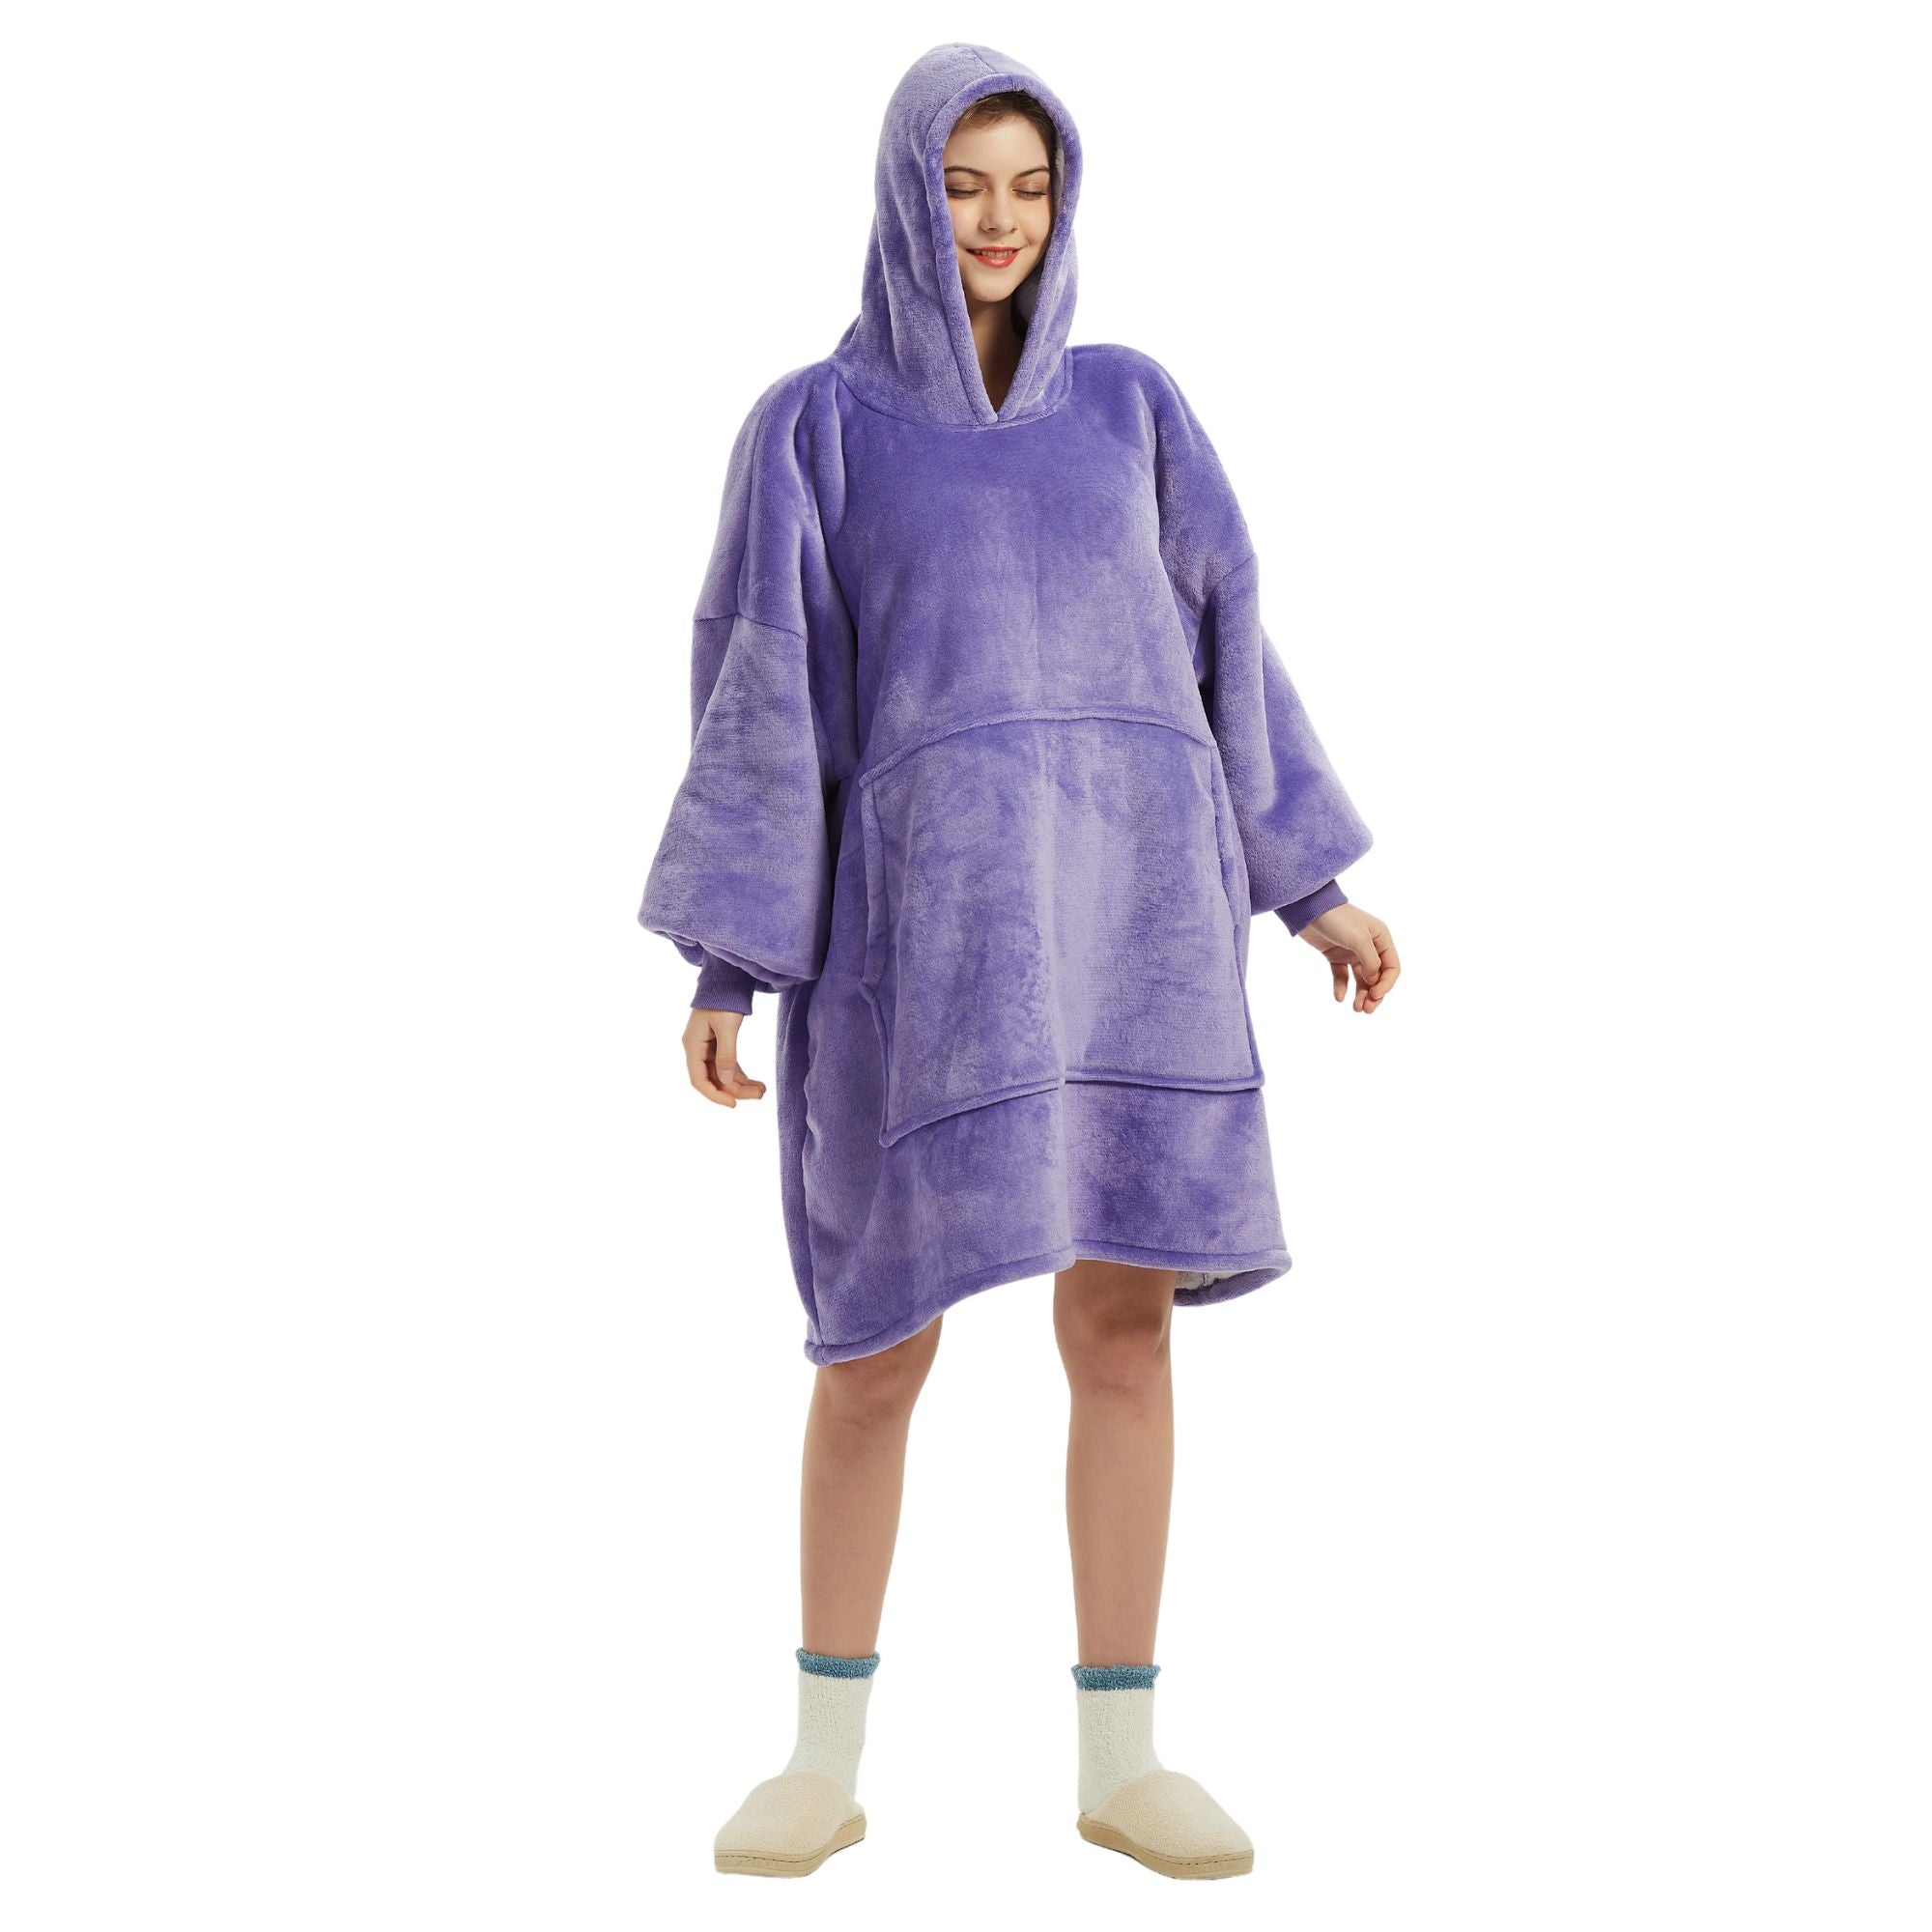 The Oversized Hoodie® purple soft cosy comfy sweet 